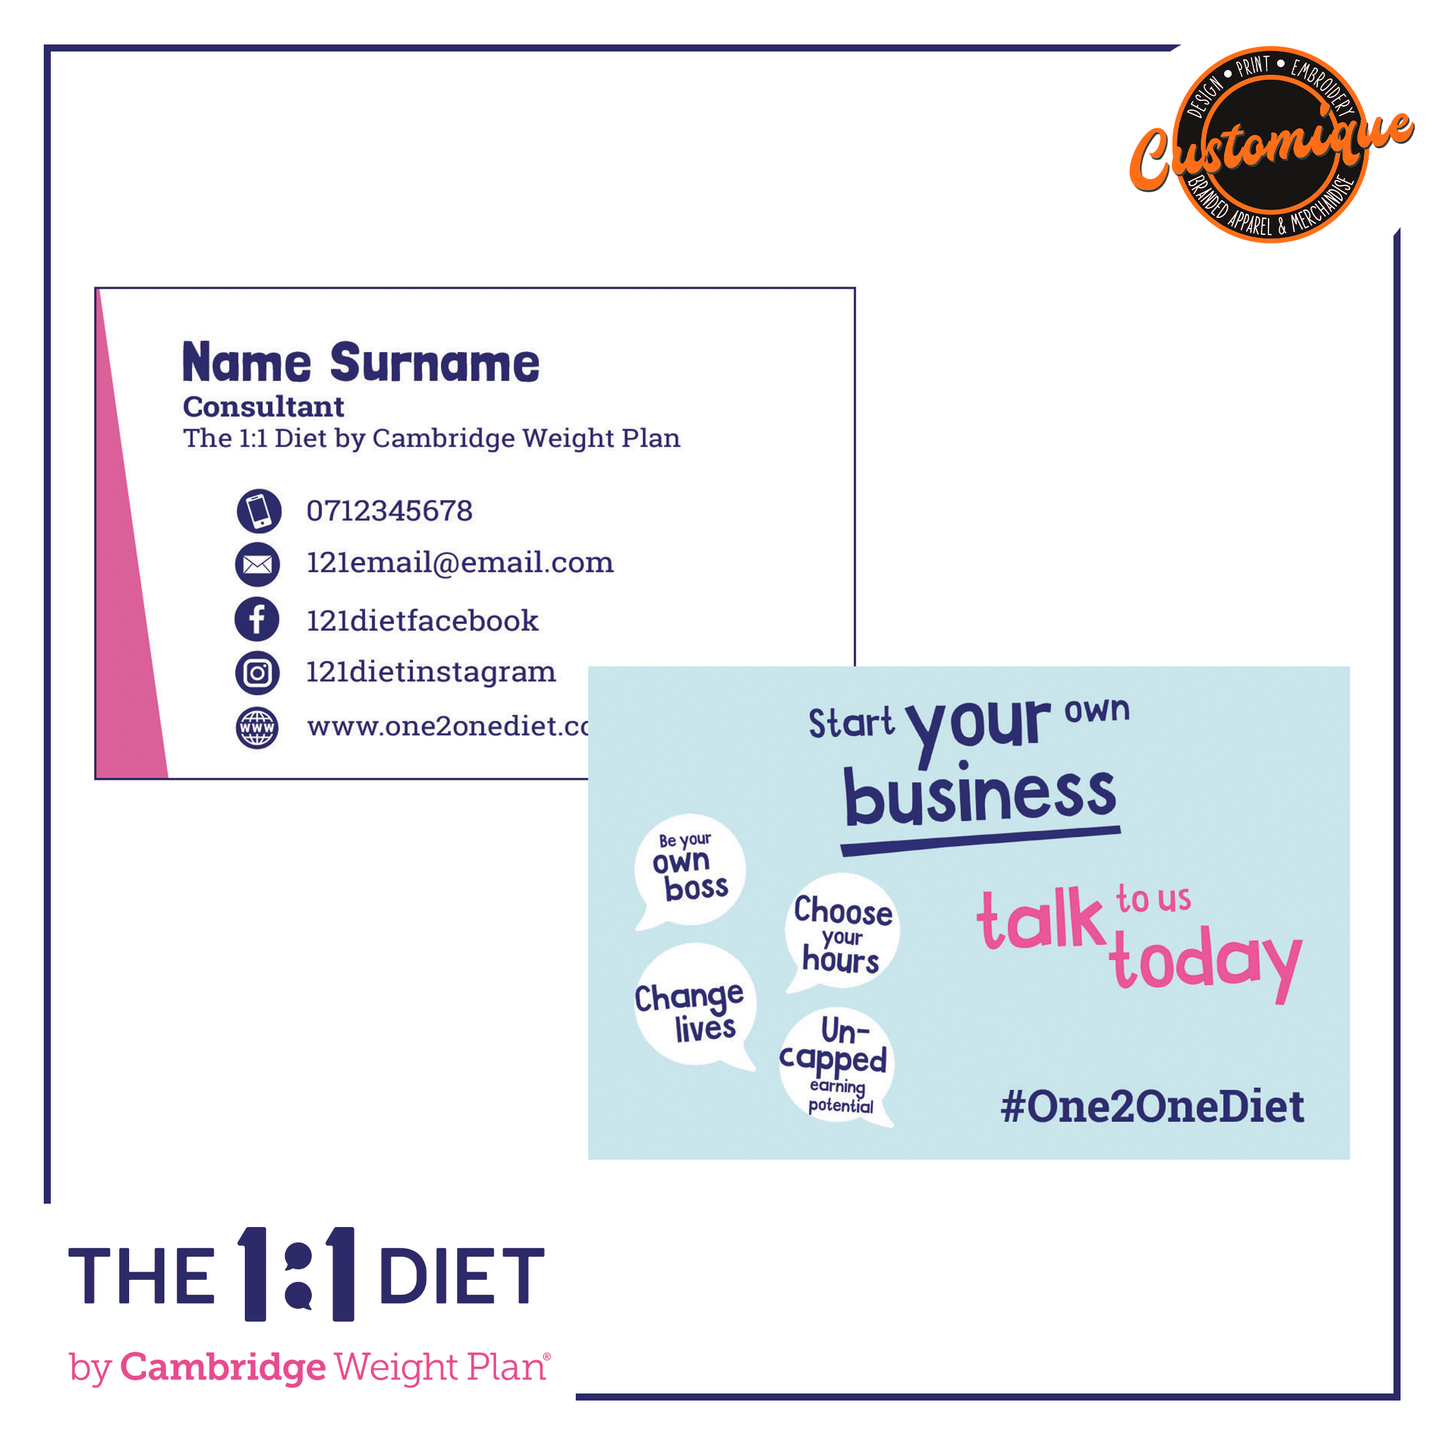 The 1:1 Diet - Classic Business Cards